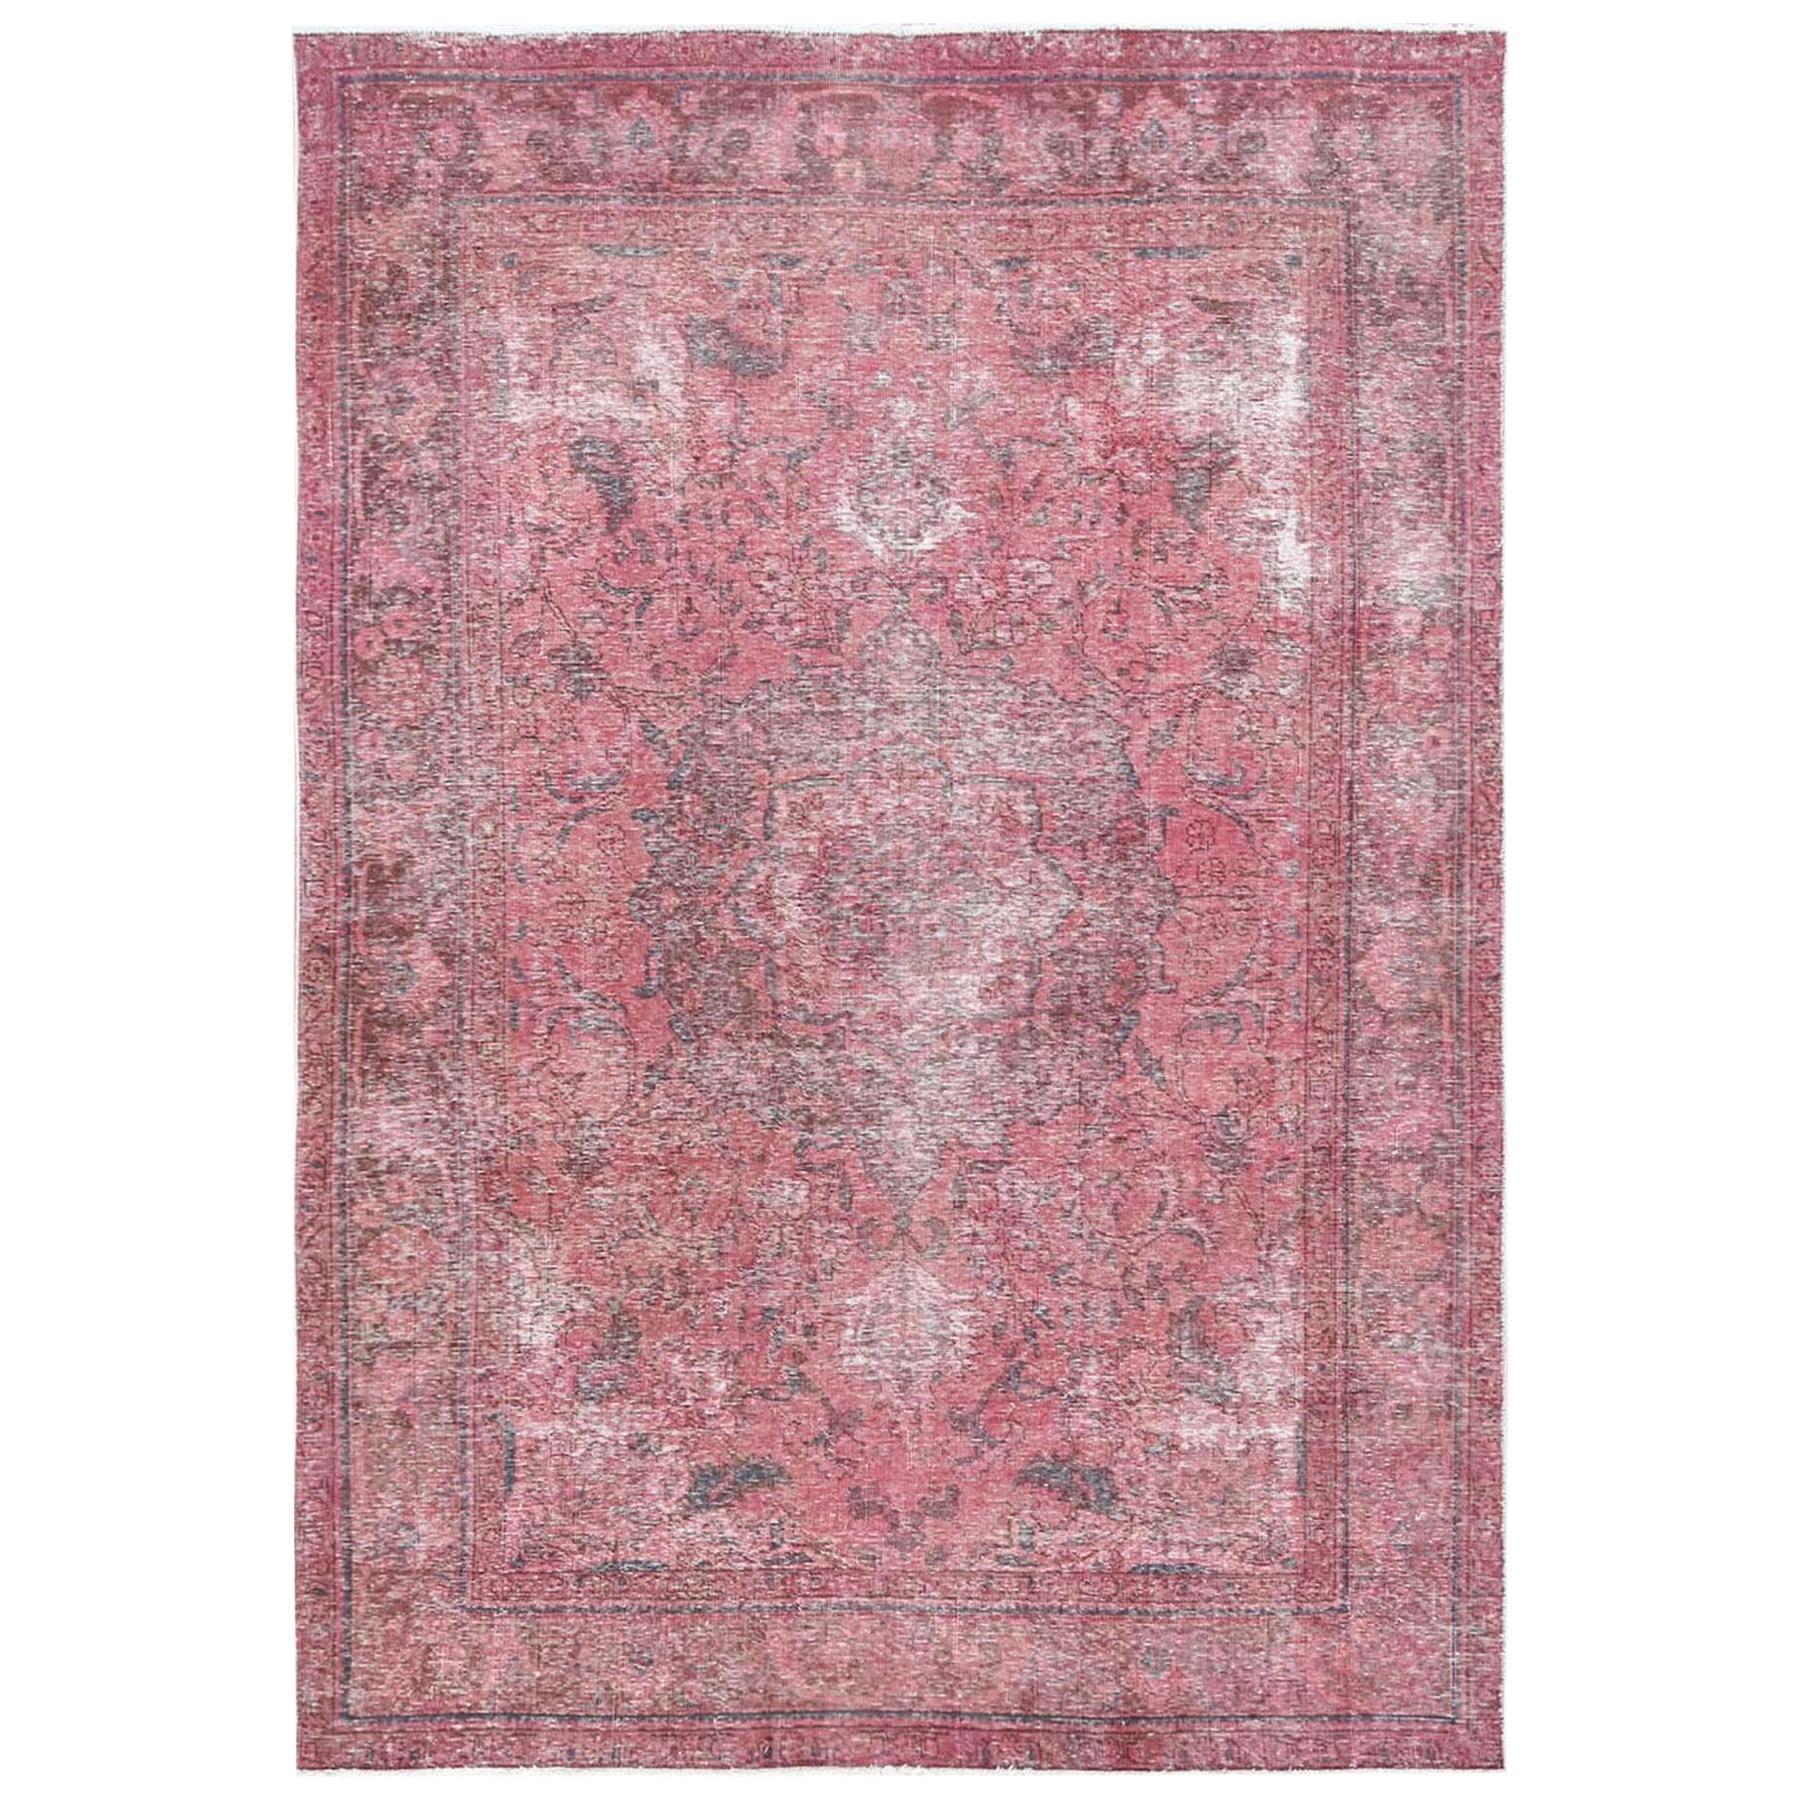 Pink Shabby Chic Vintage Look Medallion, Shabby Chic Rug